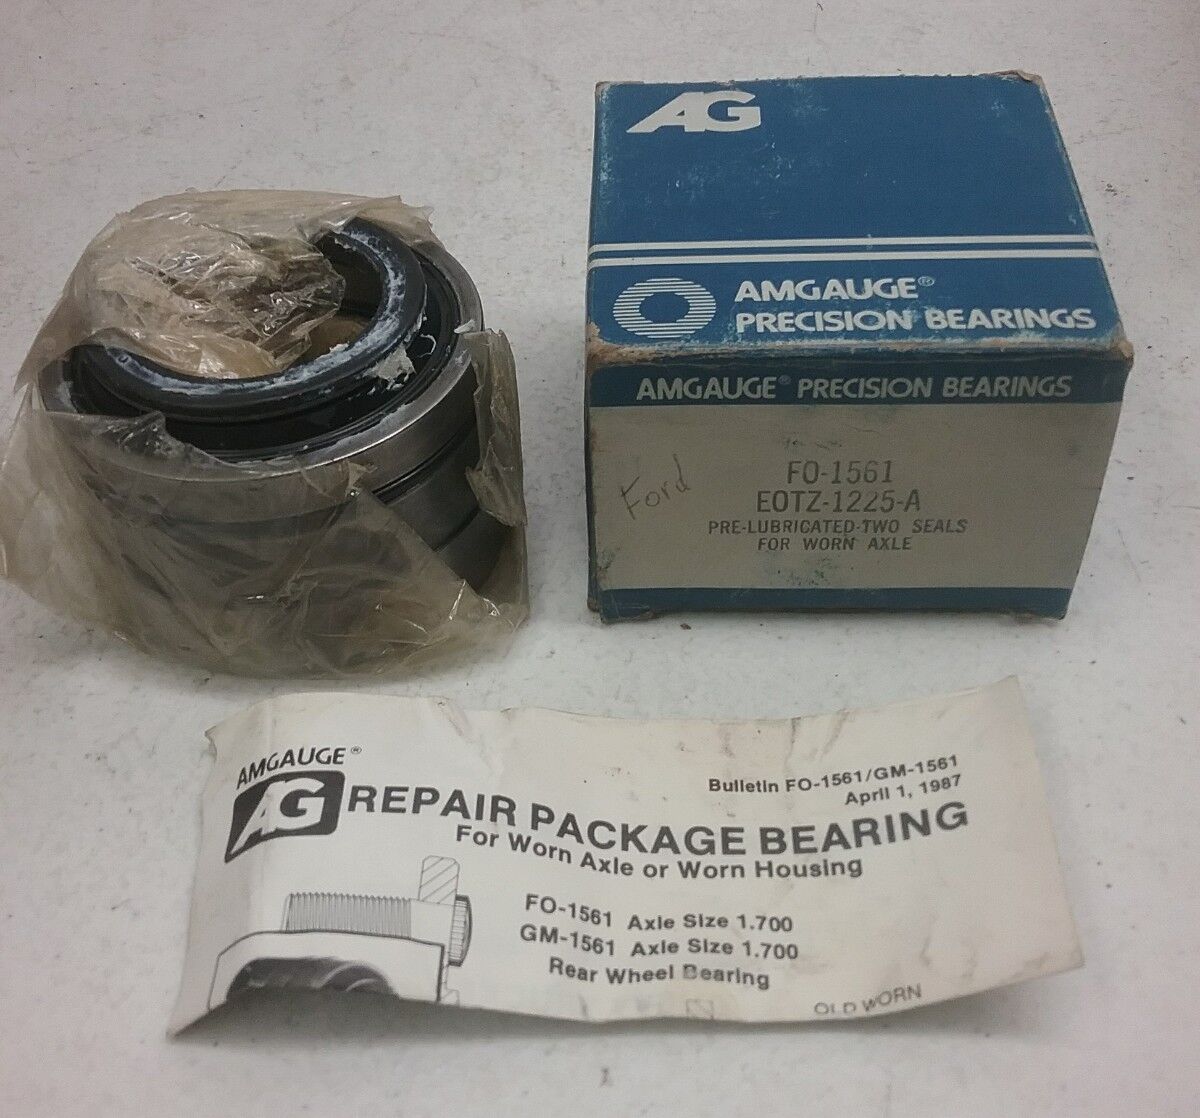 AMGUAGE PRECISION BEARINGS PRE-LUBRICATED TWO SEALS #FO-1561, EOTZ-1225-A